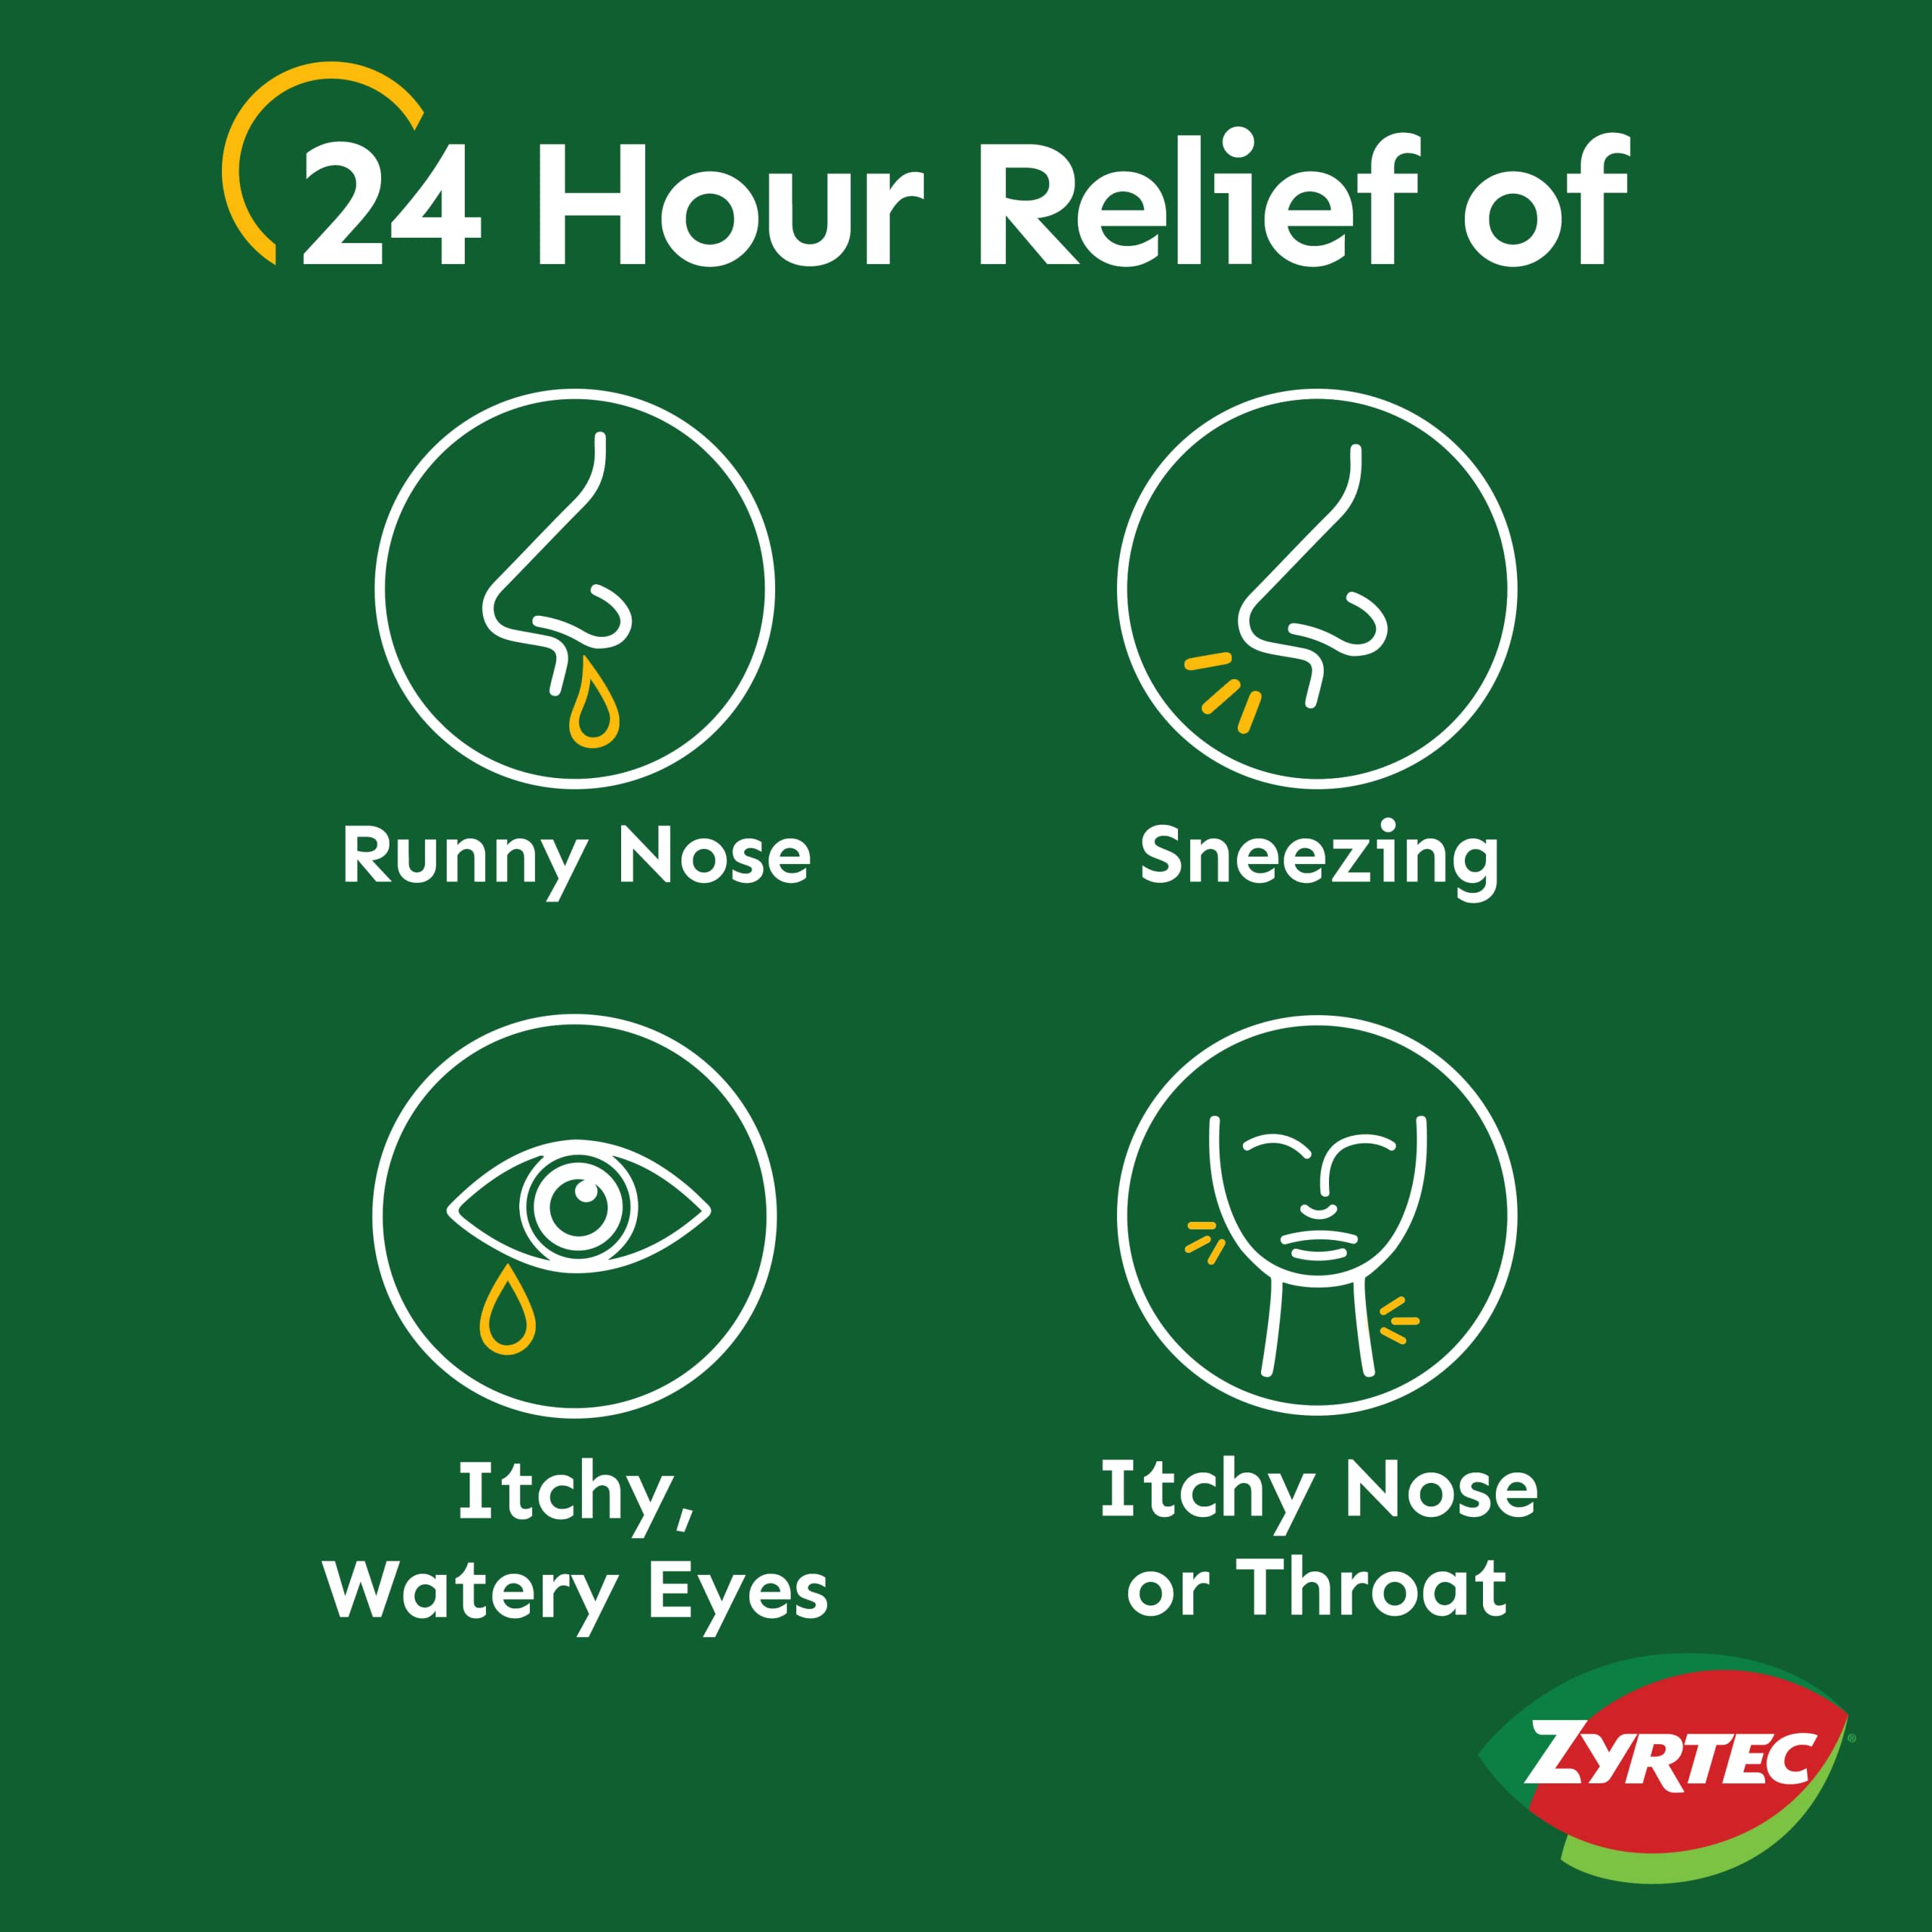 Zyrtec 24 Hour Allergy Relief Tablets, Indoor & Outdoor Allergy Medicine with 10 mg Cetirizine HCl per Antihistamine Tablet, 47ct Bundle Pack (1 x 30ct, 14ct and 3x1ct)